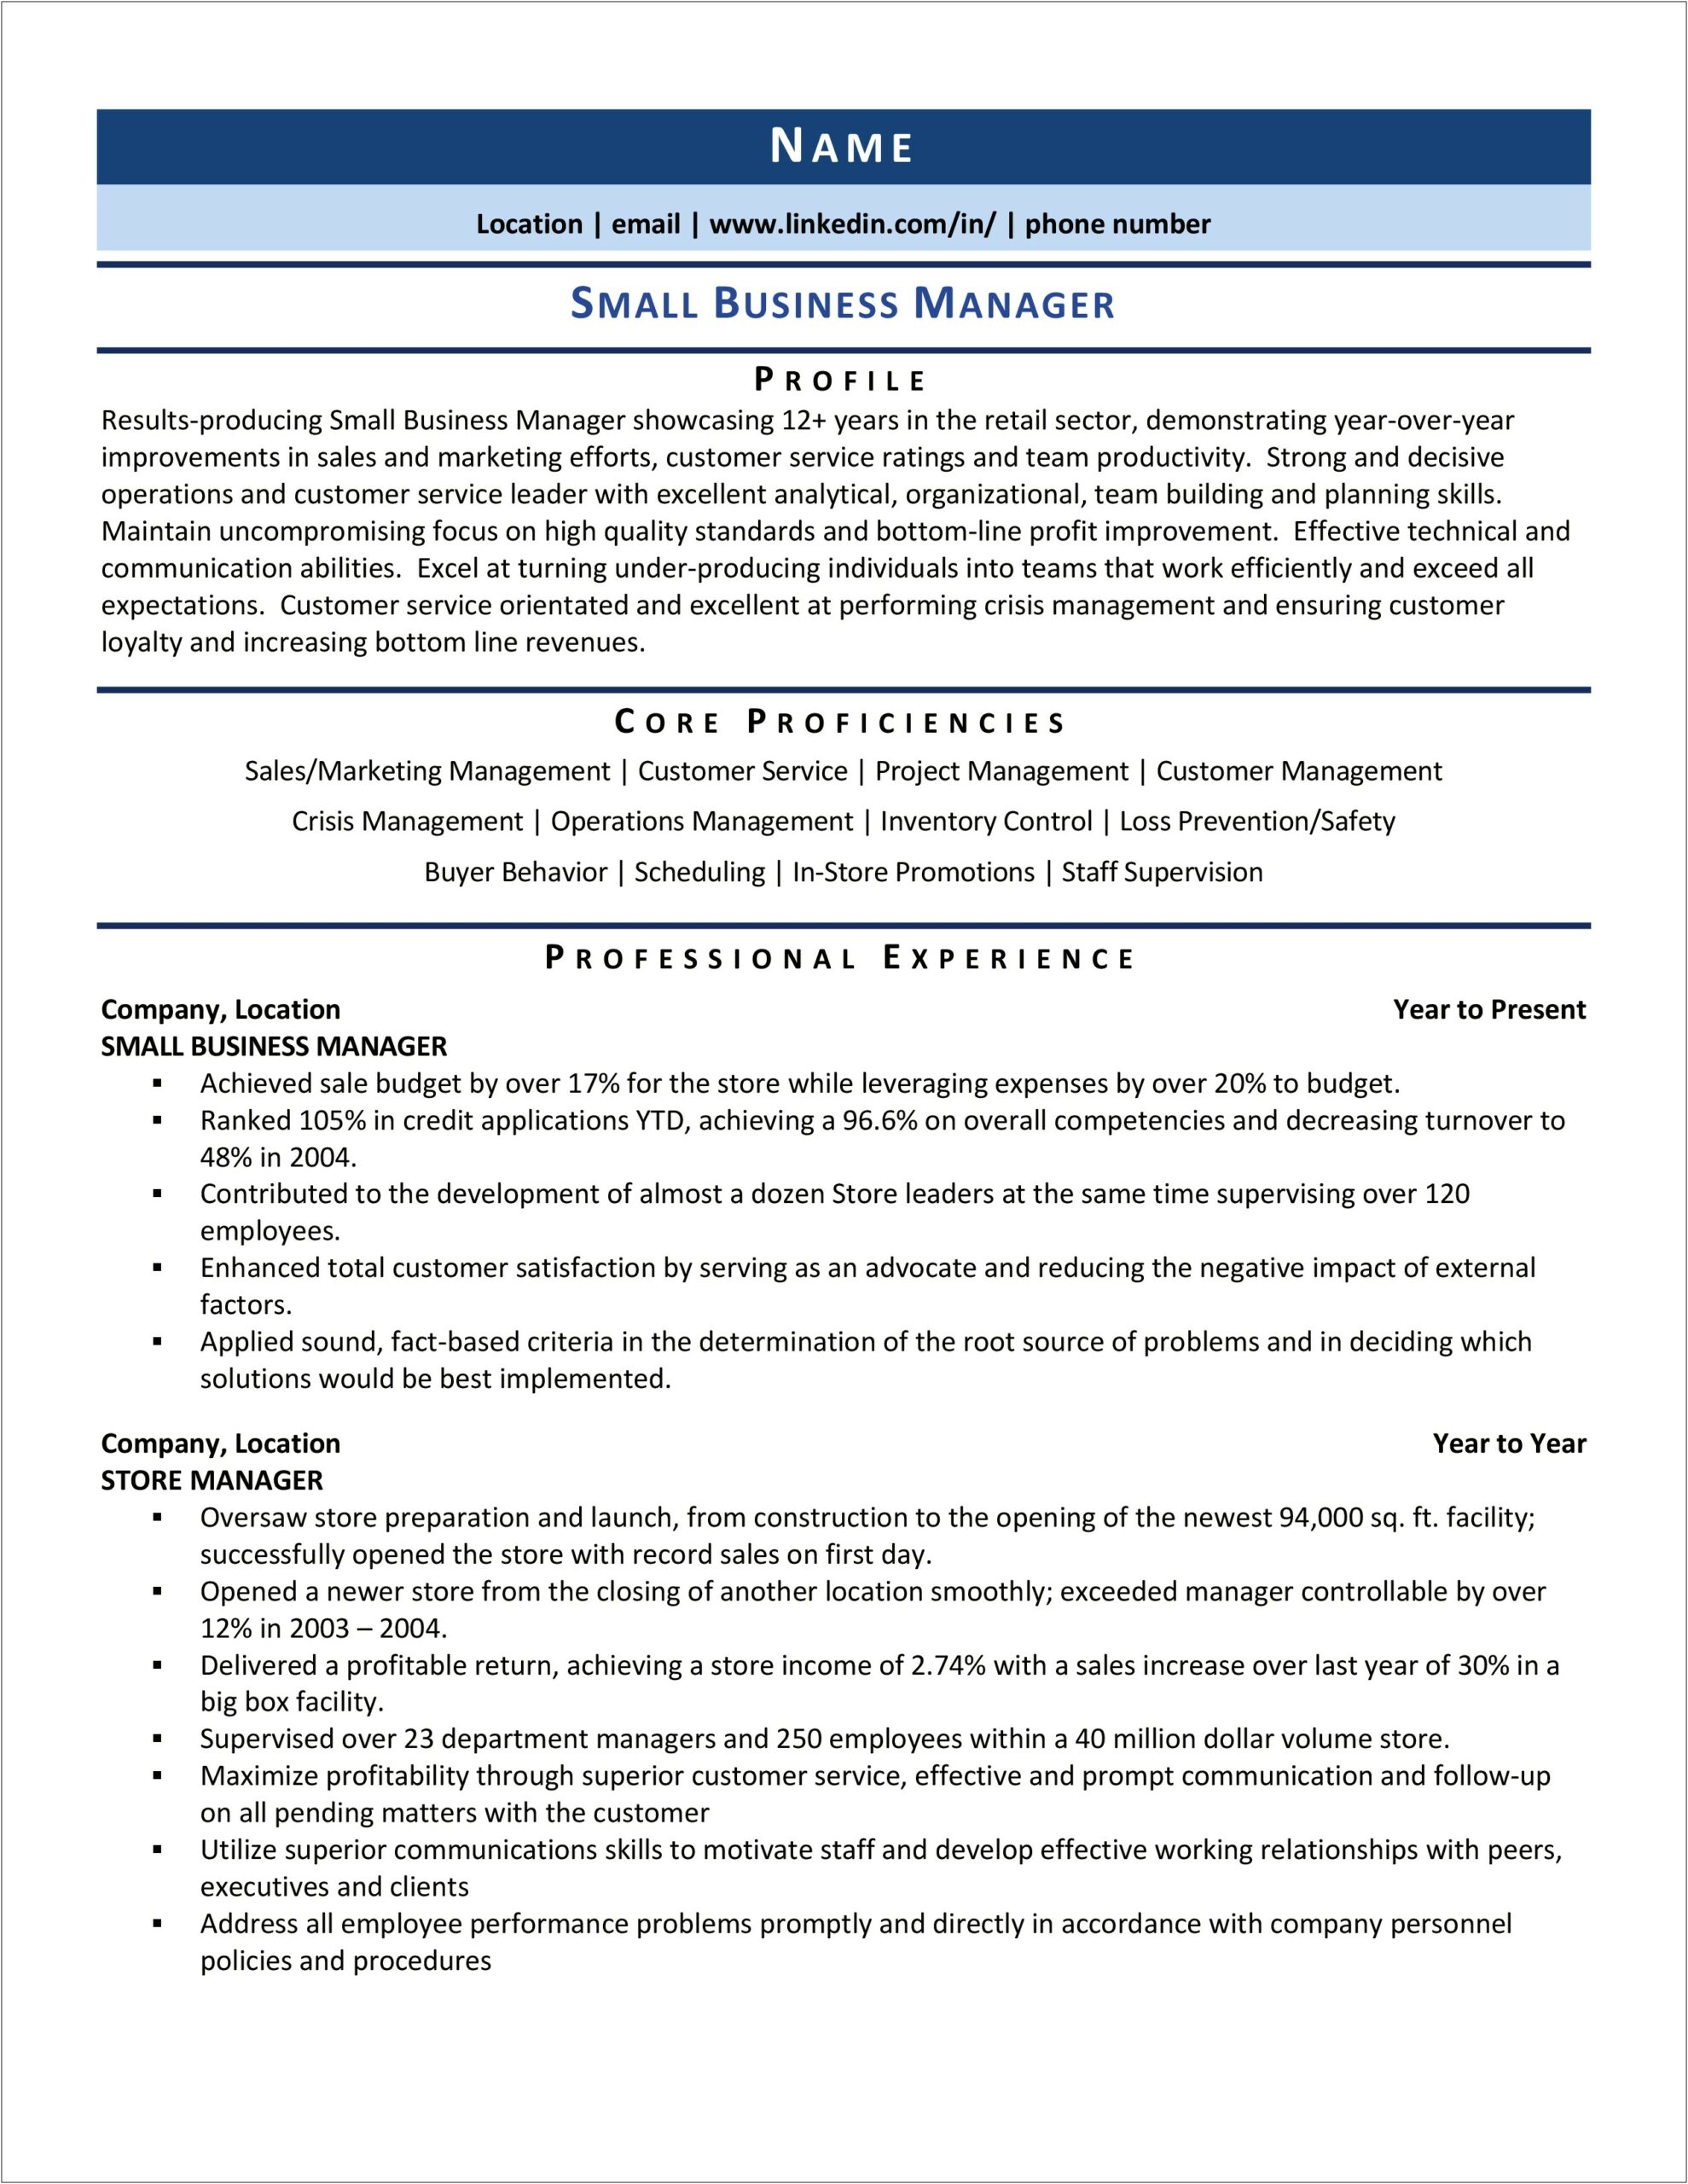 Listing Personal Experience In Employment Resume